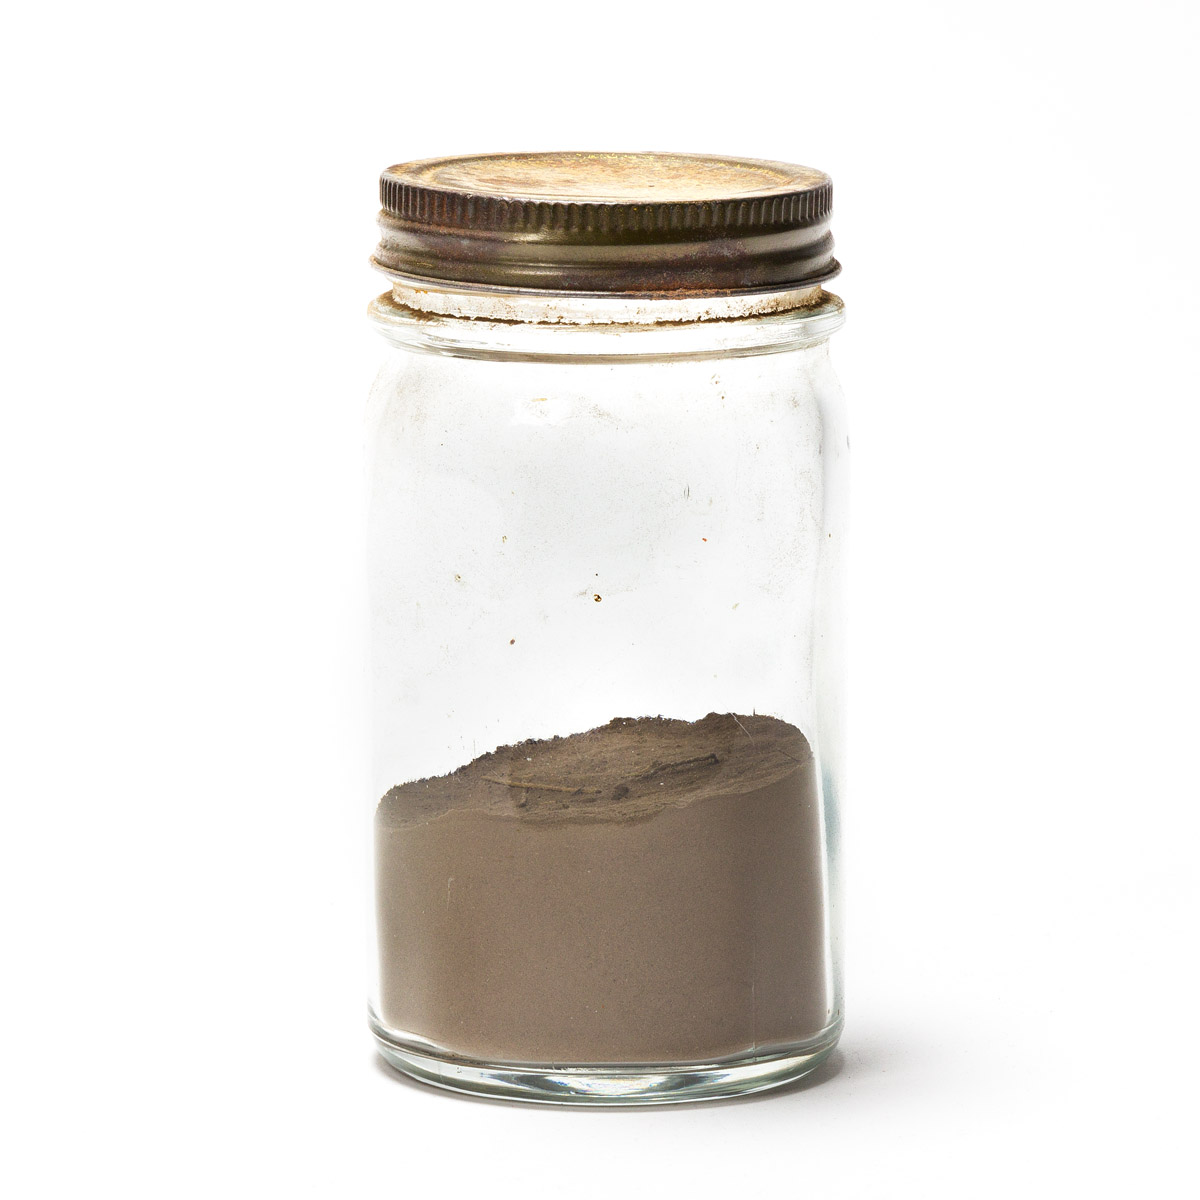 (WEST--KANSAS.) Jar of dust gathered in Kansas during the Dust Bowl, with note.